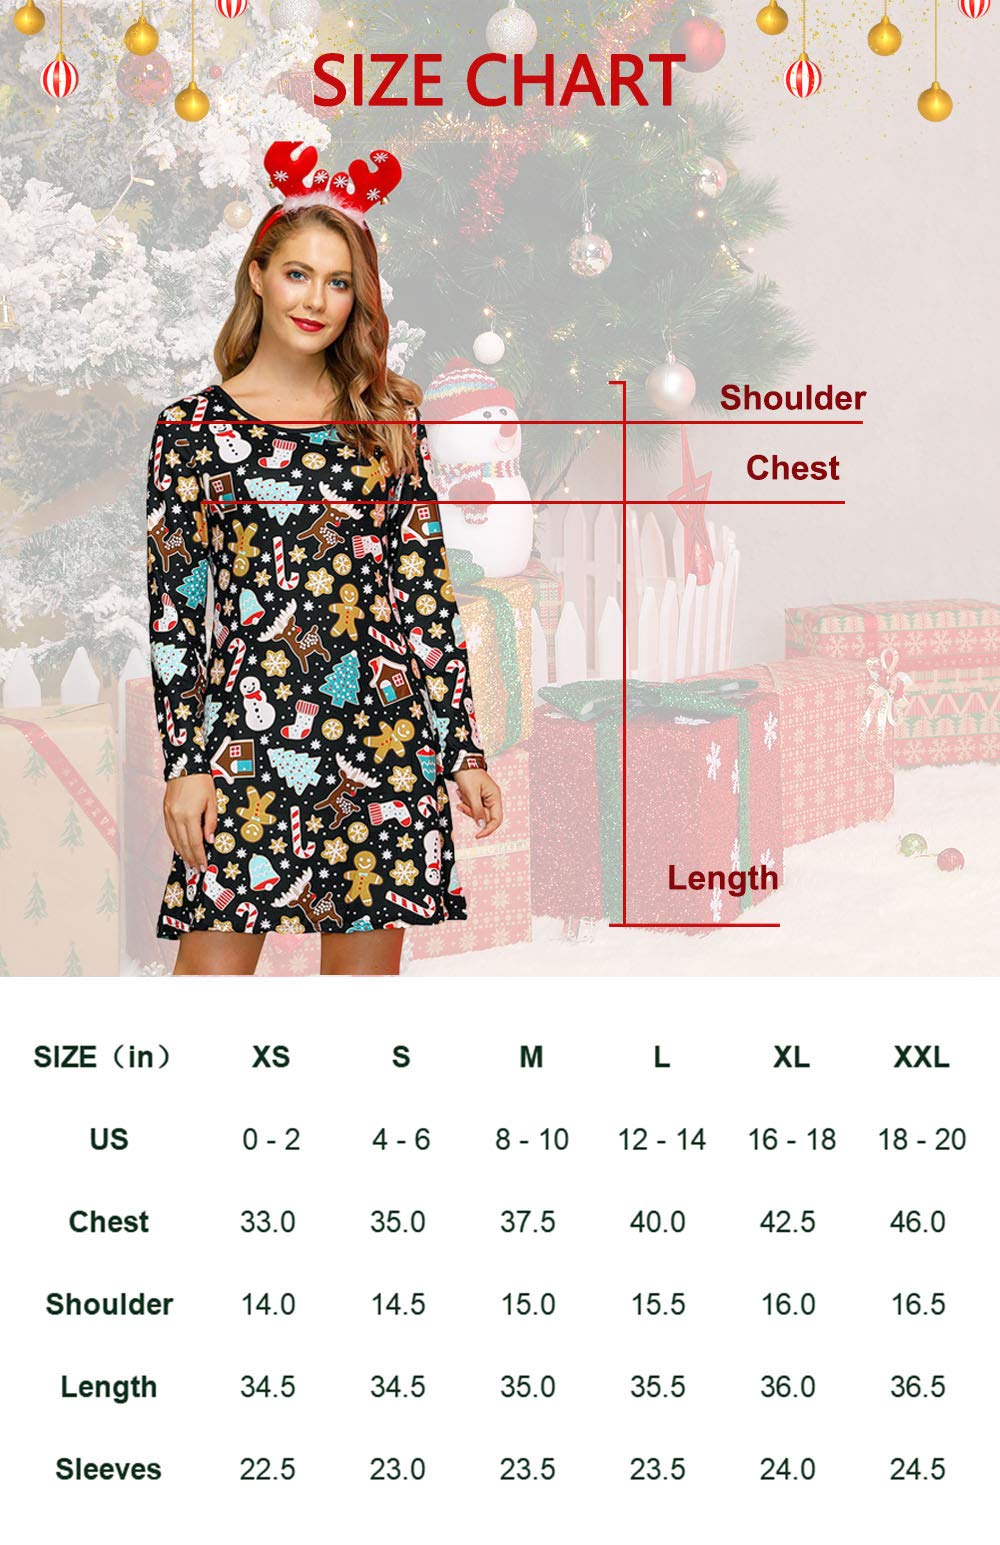 For G and PL Women's Christmas Printed Tunic Dress Long Sleeve Crewneck Casual Costume